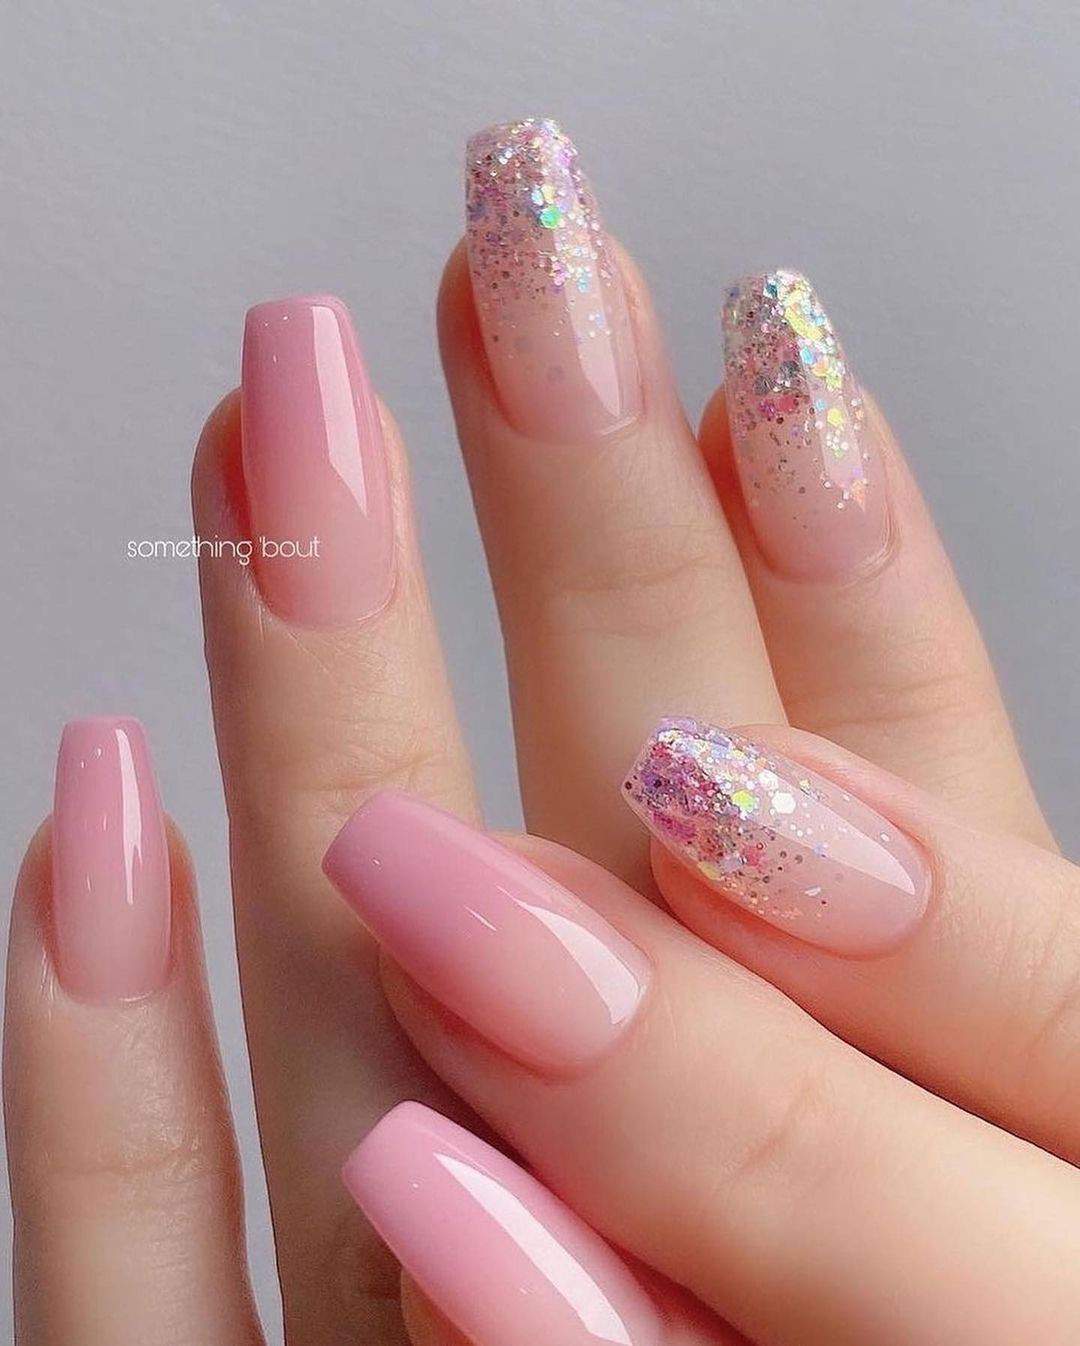 The 100+ Best Nail Designs Trends And Ideas In 2021 images 18